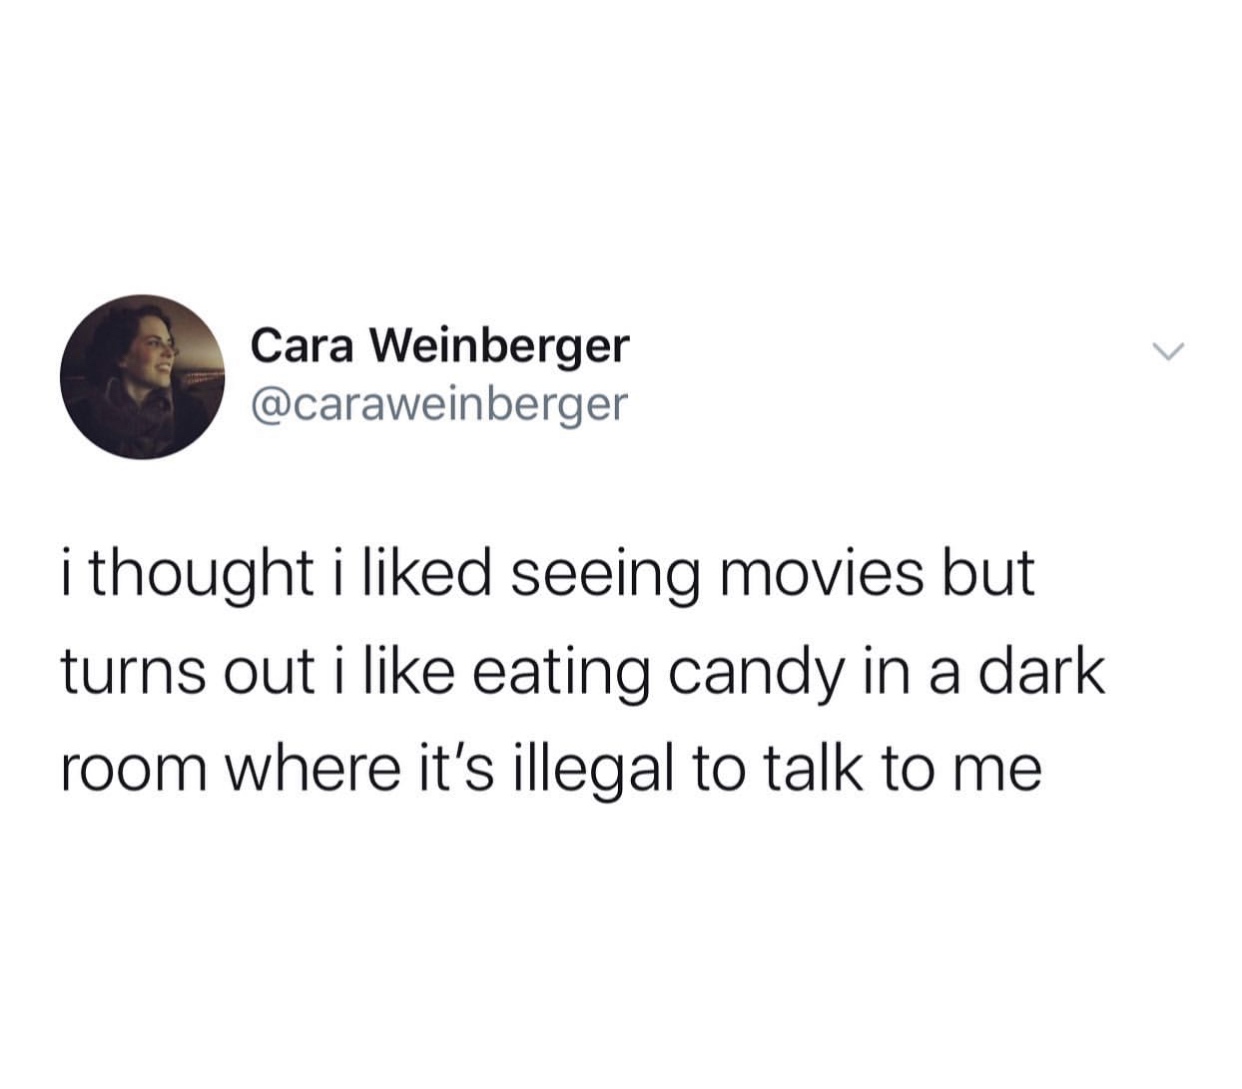 fuck did june and july go - Cara Weinberger i thought i d seeing movies but turns out i eating candy in a dark room where it's illegal to talk to me